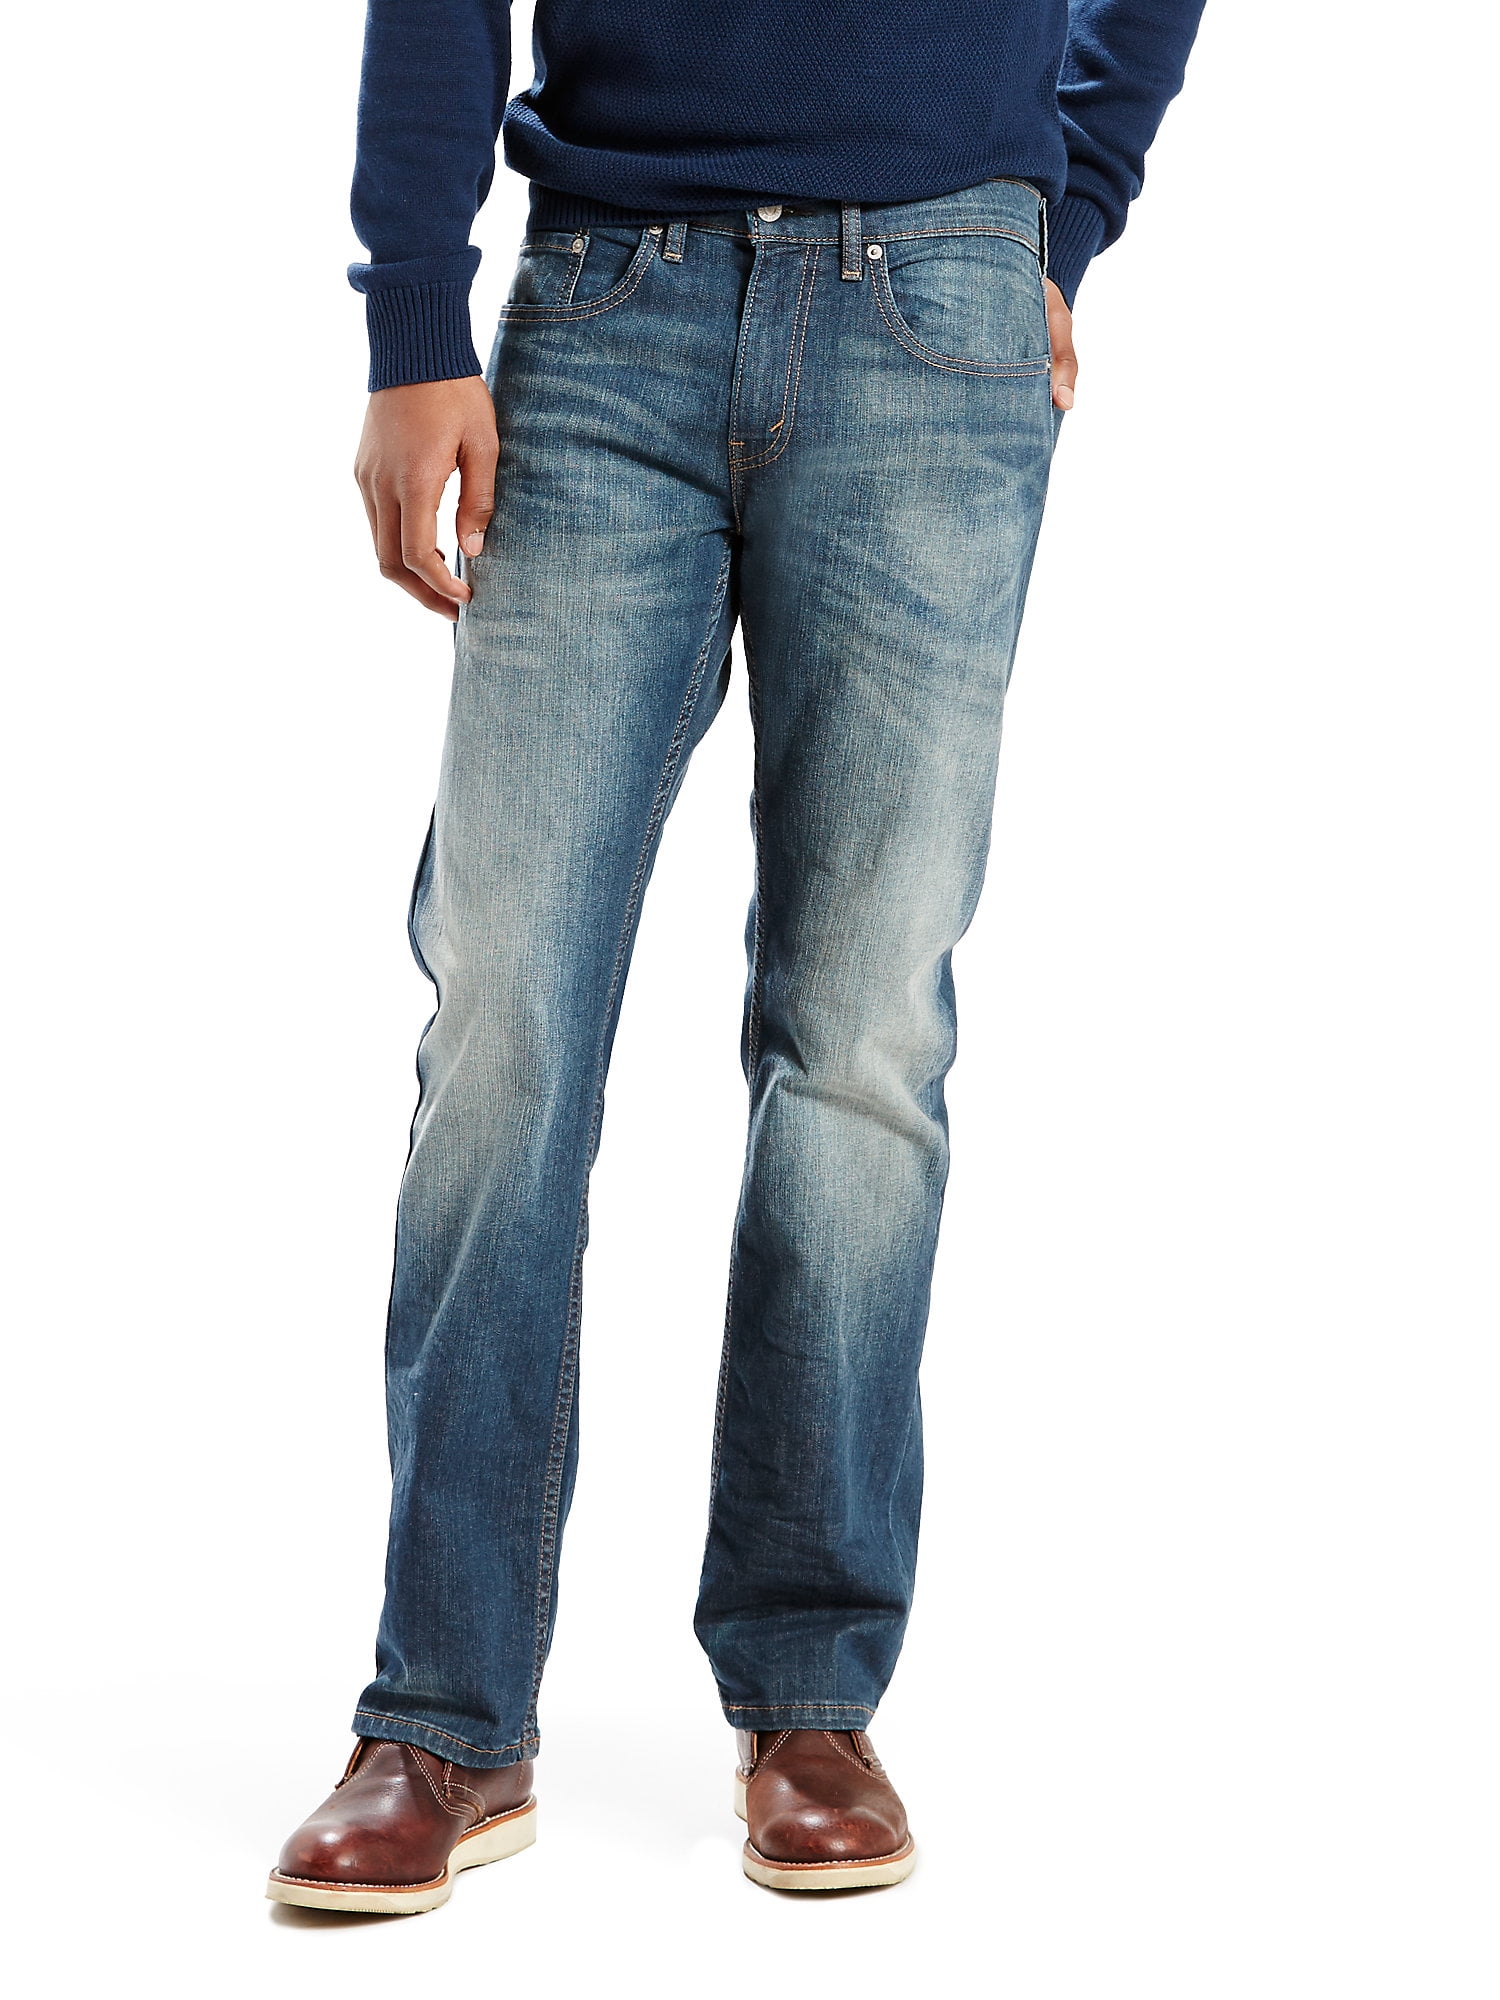 Levi's Men's Big & Tall 559 Relaxed Straight Jeans - Walmart.com